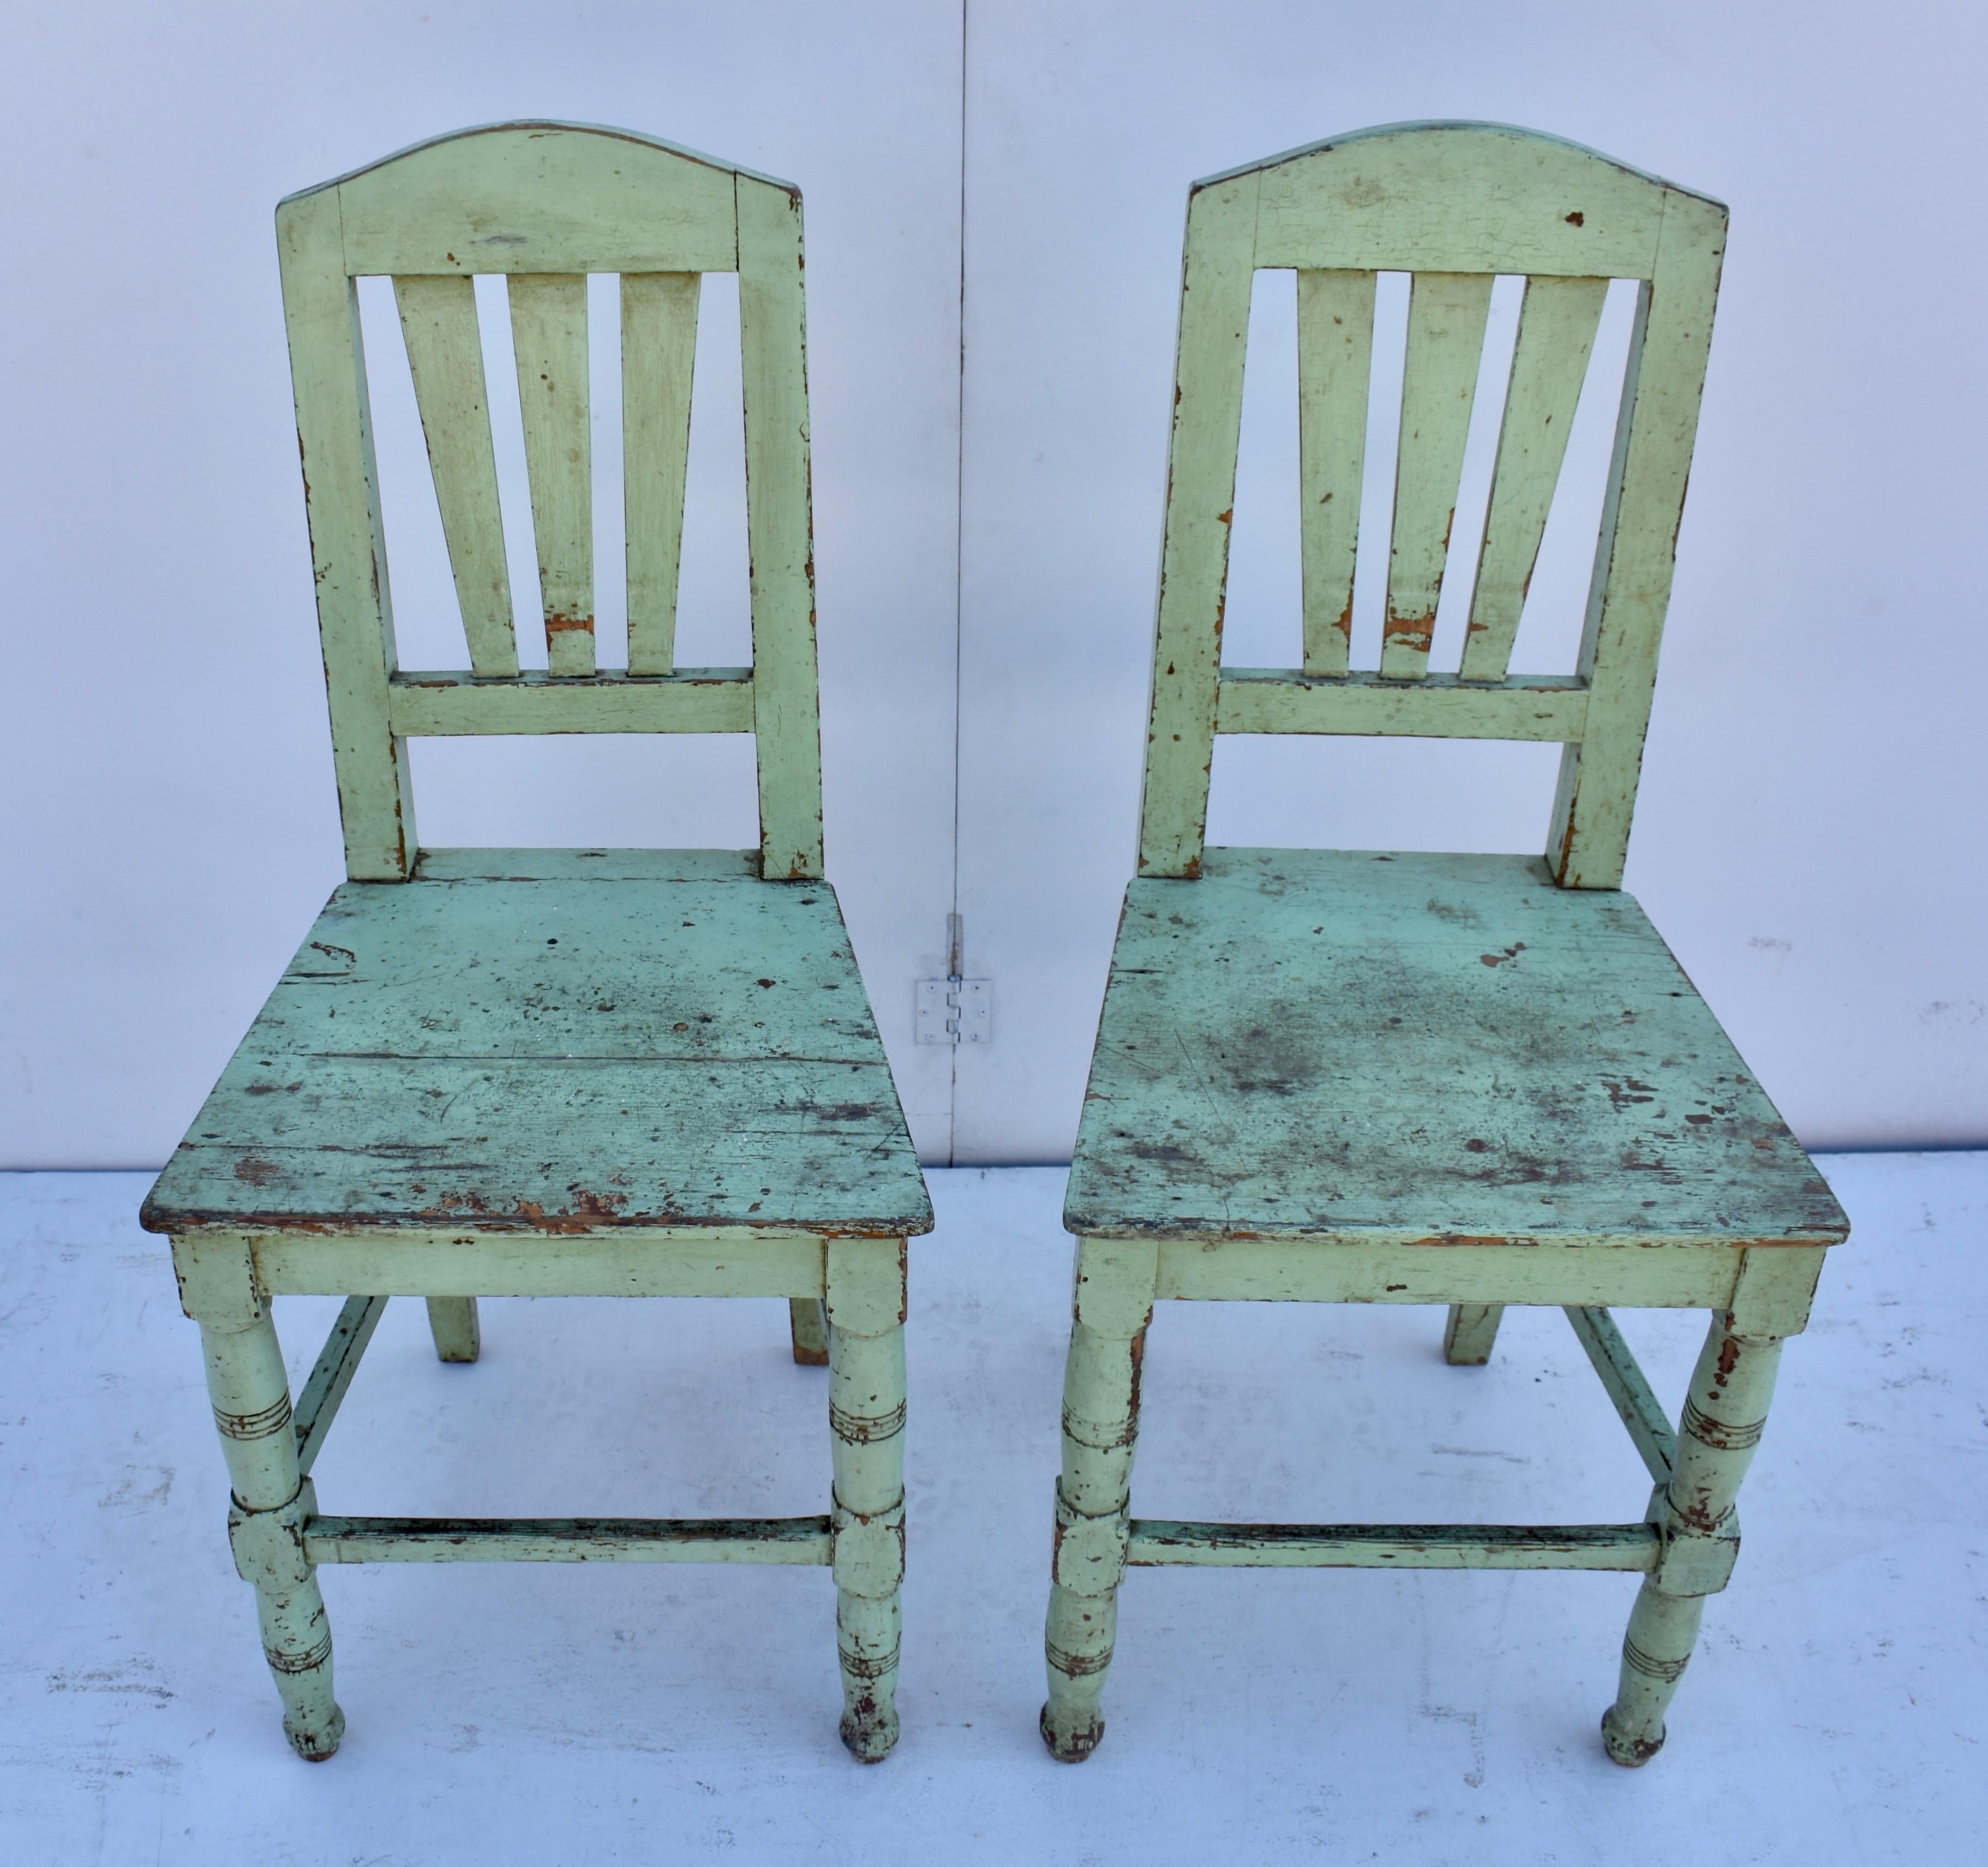 This is an attractive pair of painted pine plank seat chairs. The arched top rail encloses three broad splats. The two back legs are straight and those at the front are turned, with stretchers at the front and sides. The flat plank seat may look